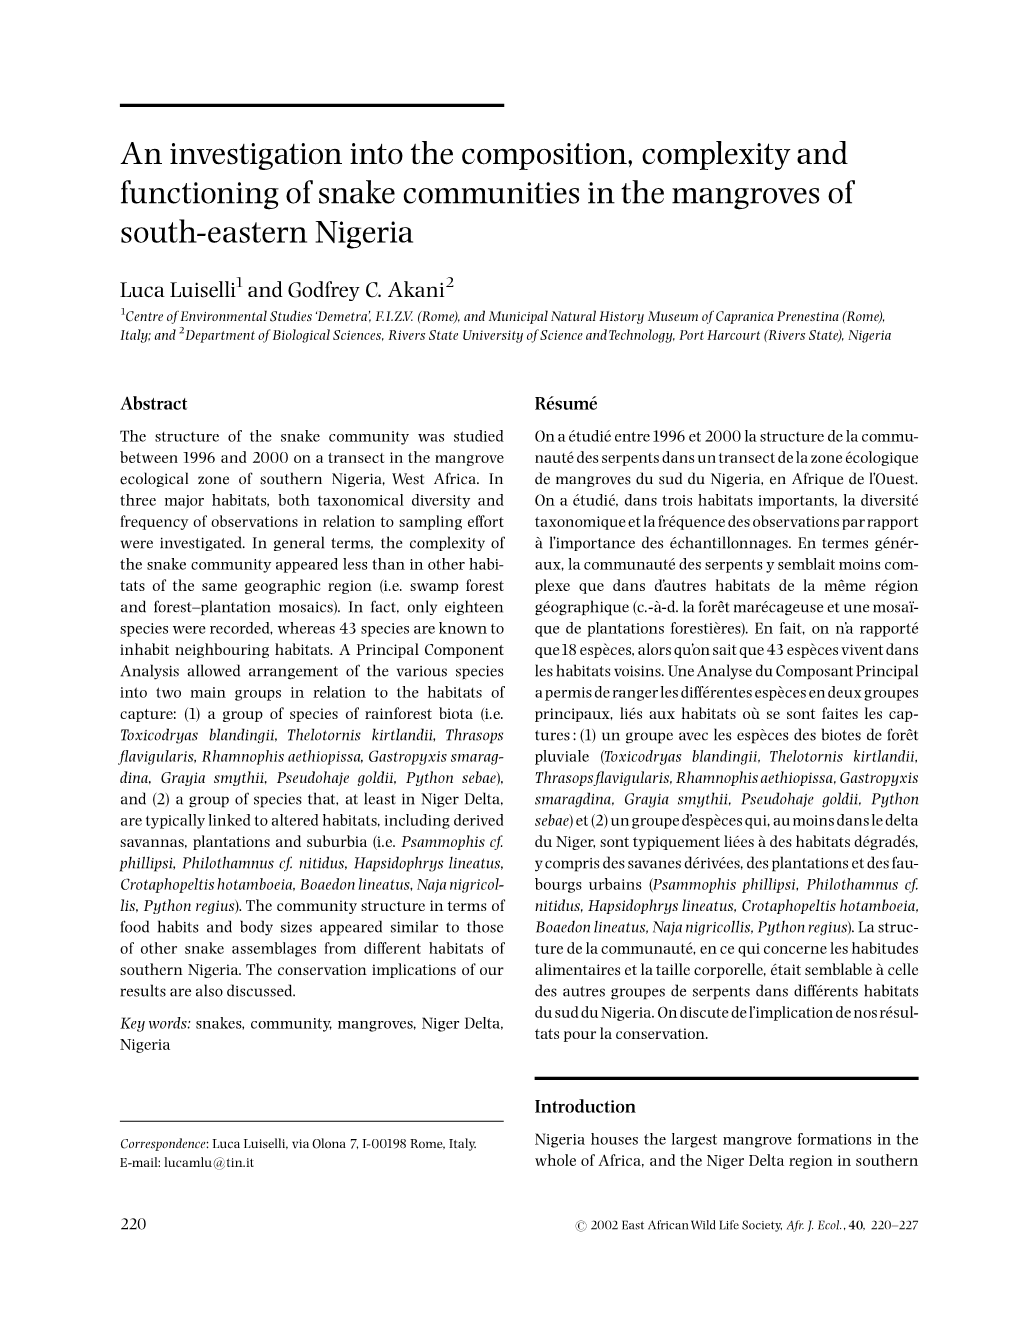 An Investigation Into the Composition, Complexity and Functioning of Snake Communities in the Mangroves of South-Eastern Nigeria